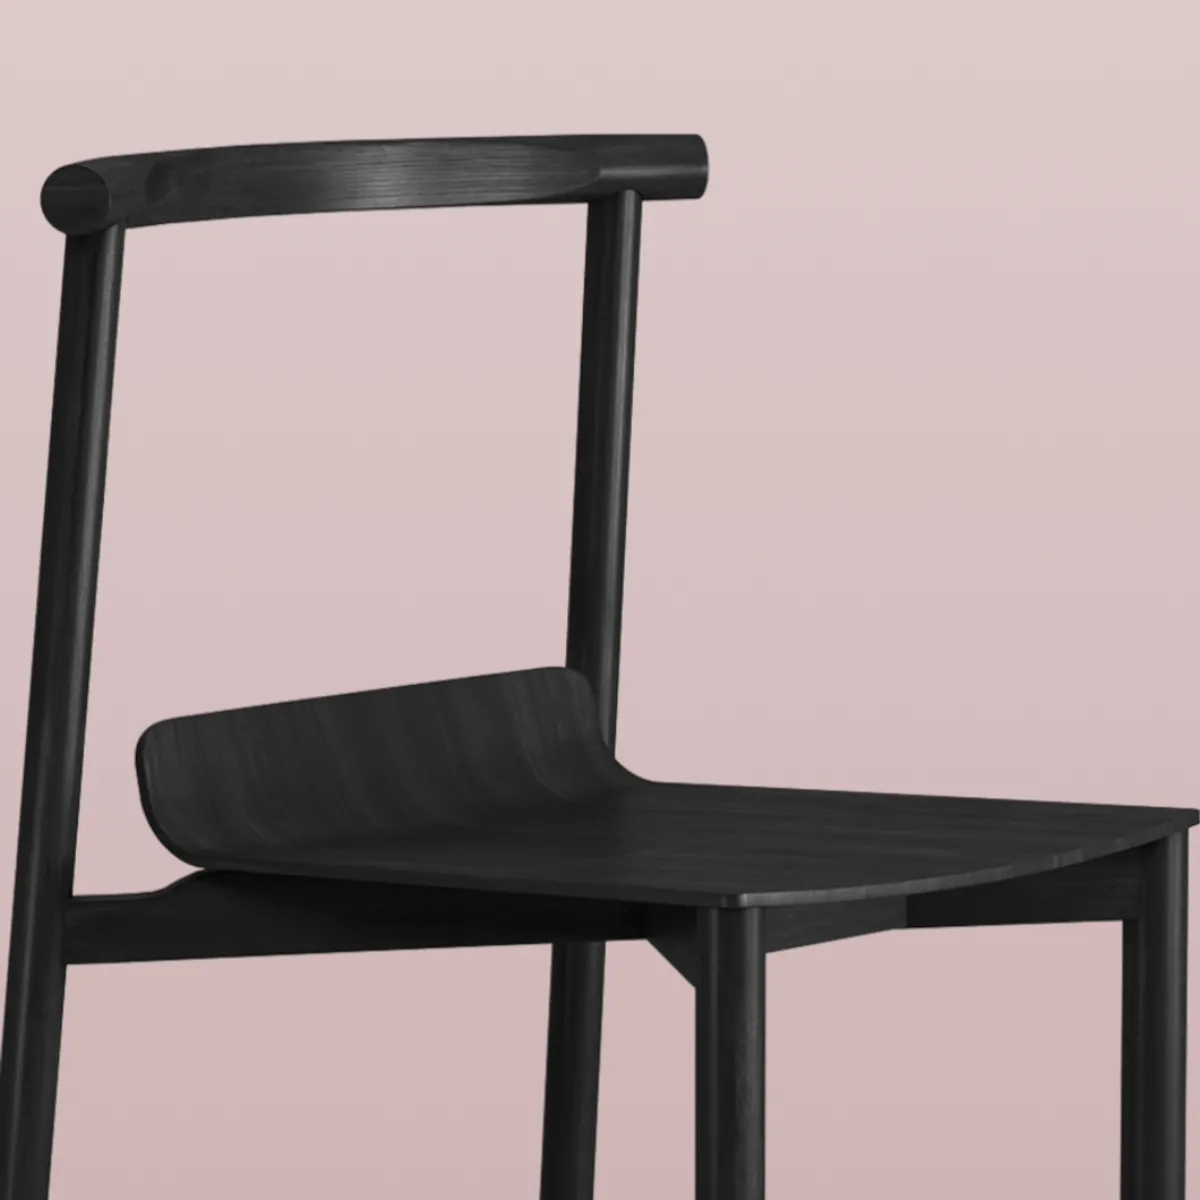 Wox side chair 4